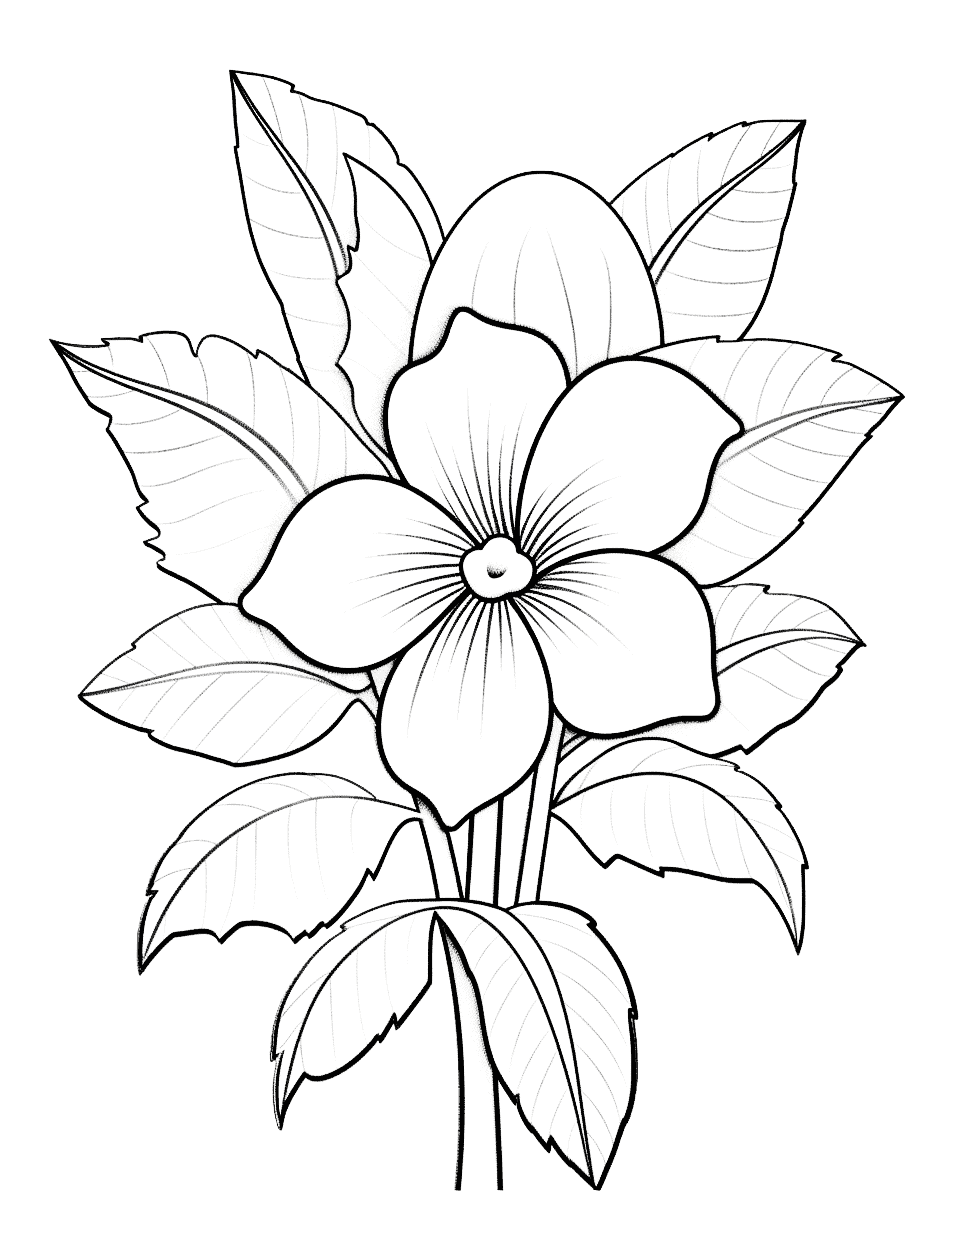 Advanced Tropical Flower Drawing Coloring Page - A detailed and realistic tropical flower drawing for the advanced colorist.